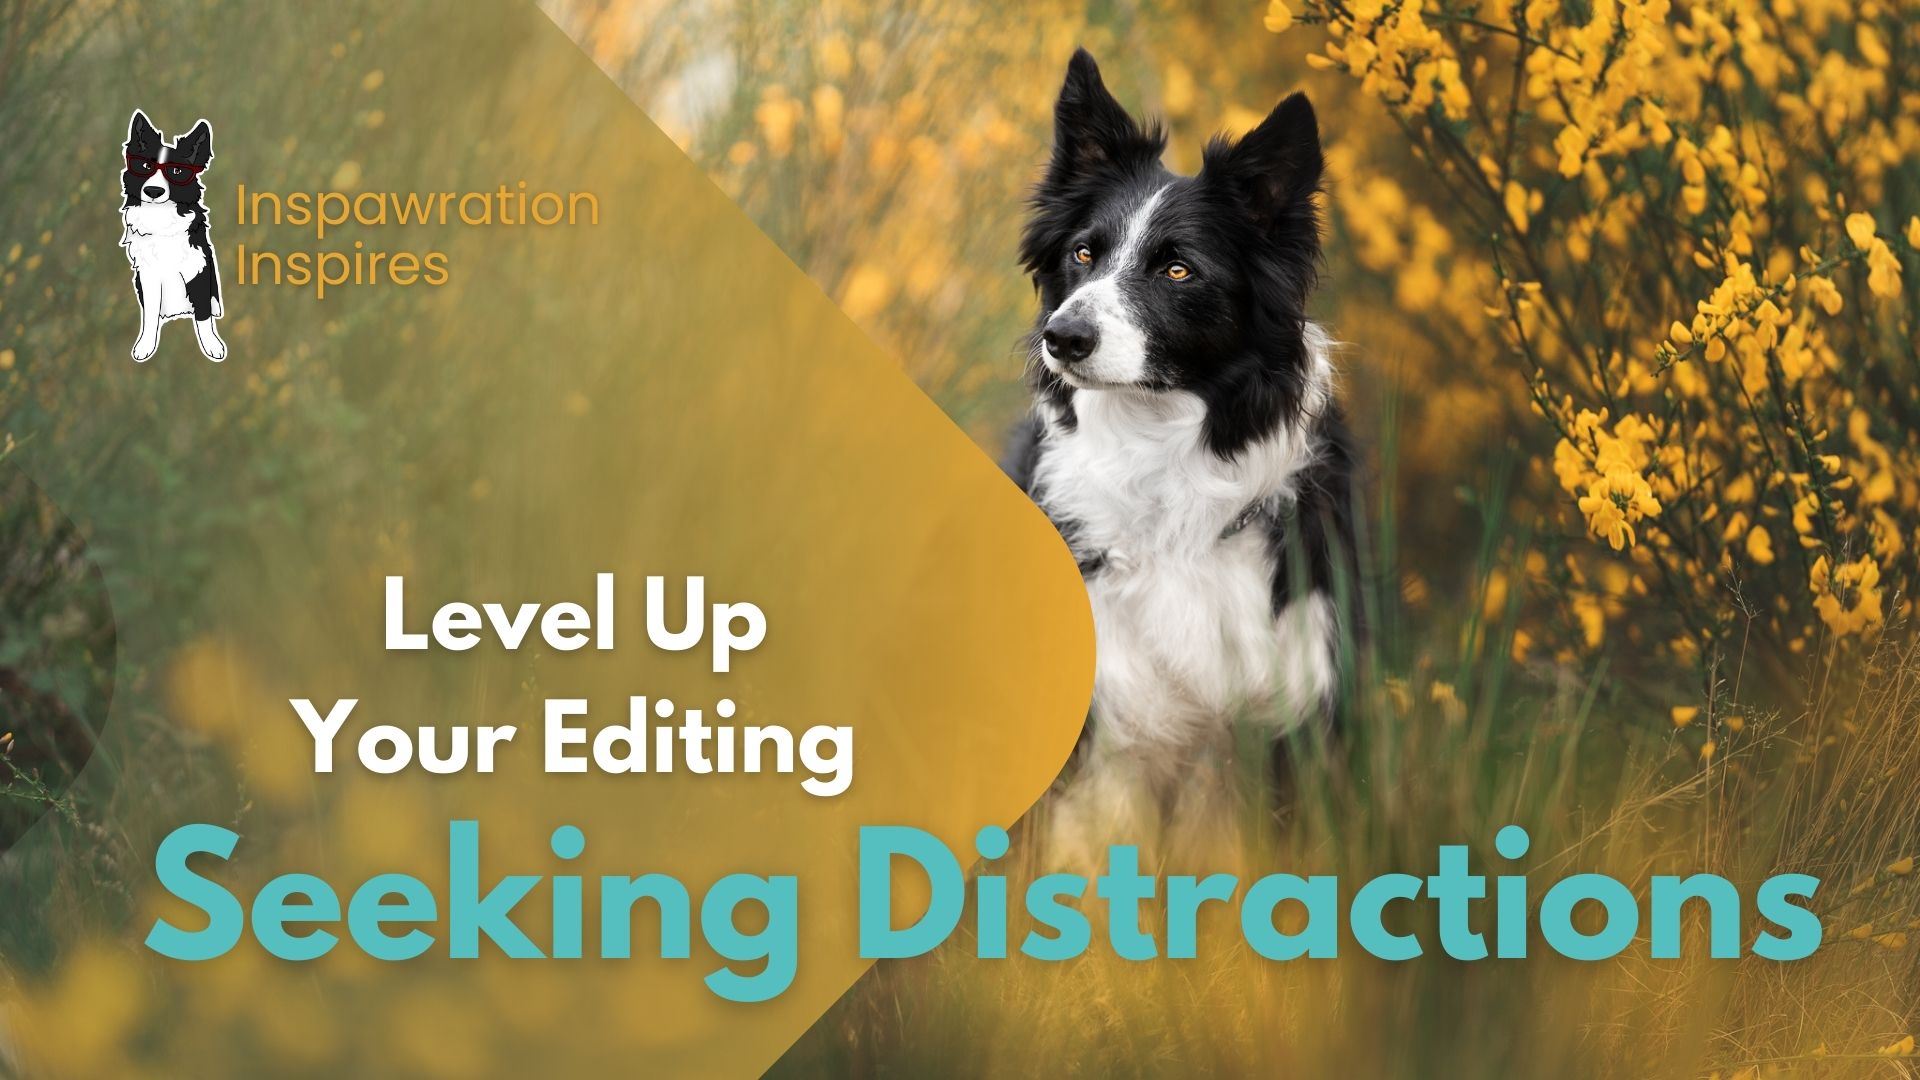 Level Up Your Editing: Seeking Distractions